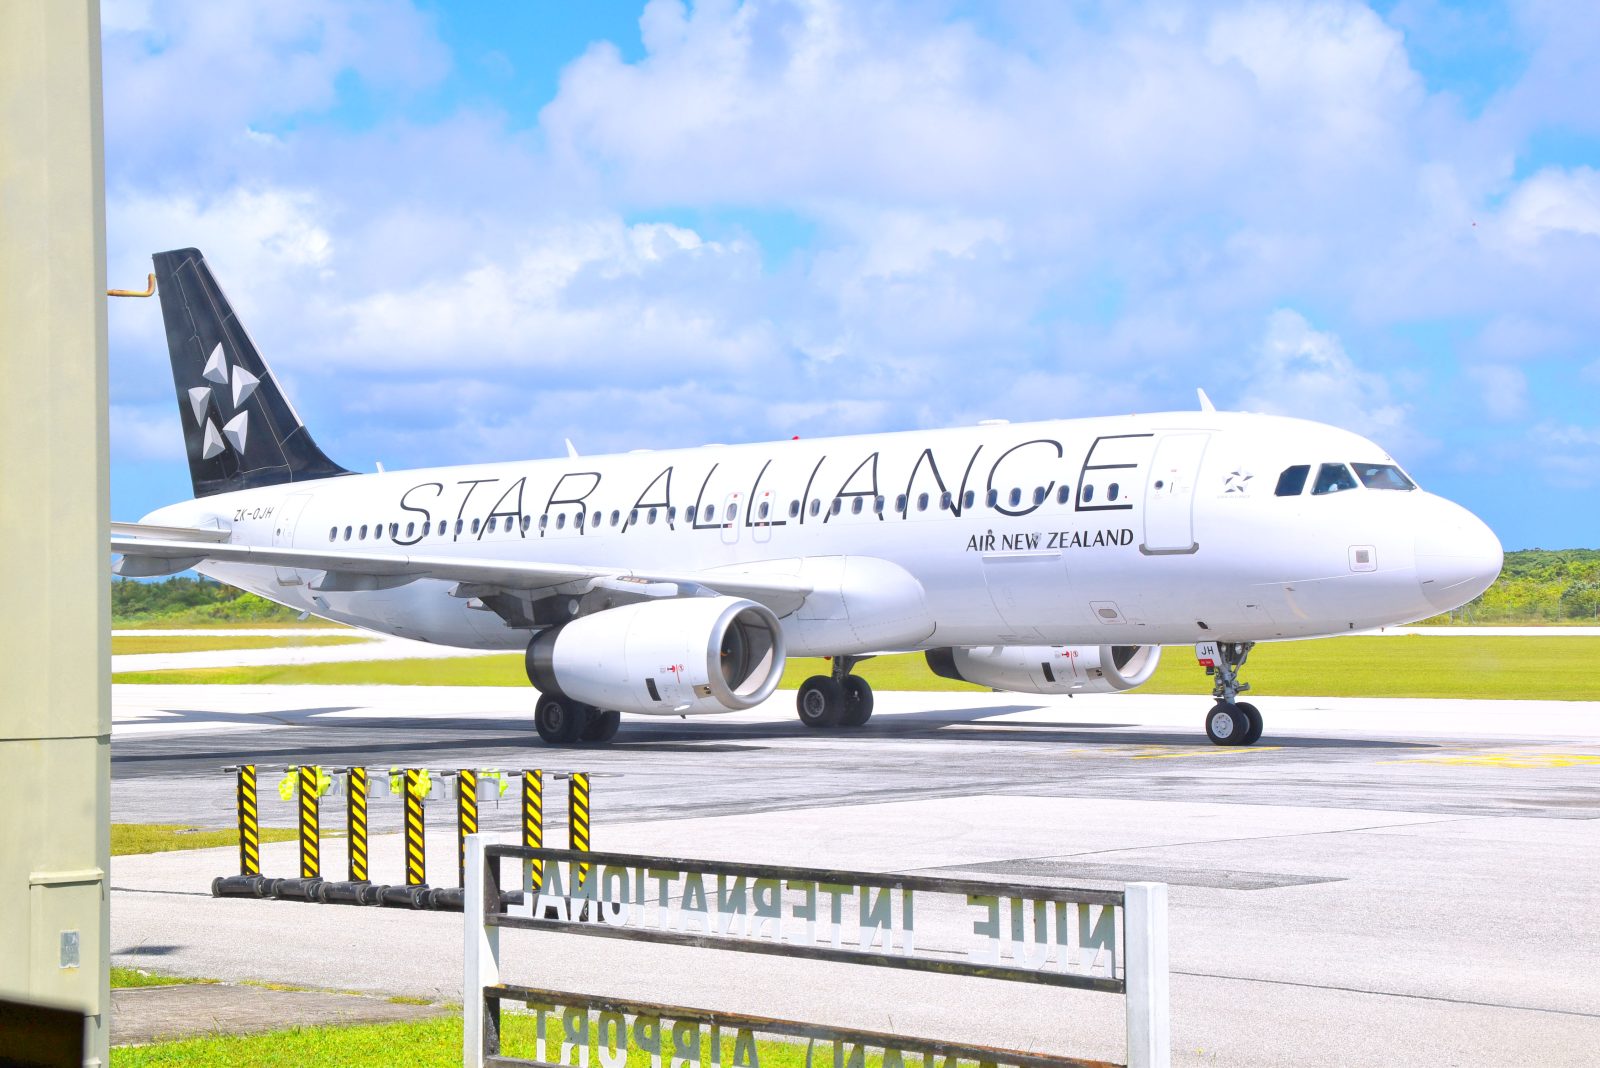 How Long Does it Take to Fly to Niue?